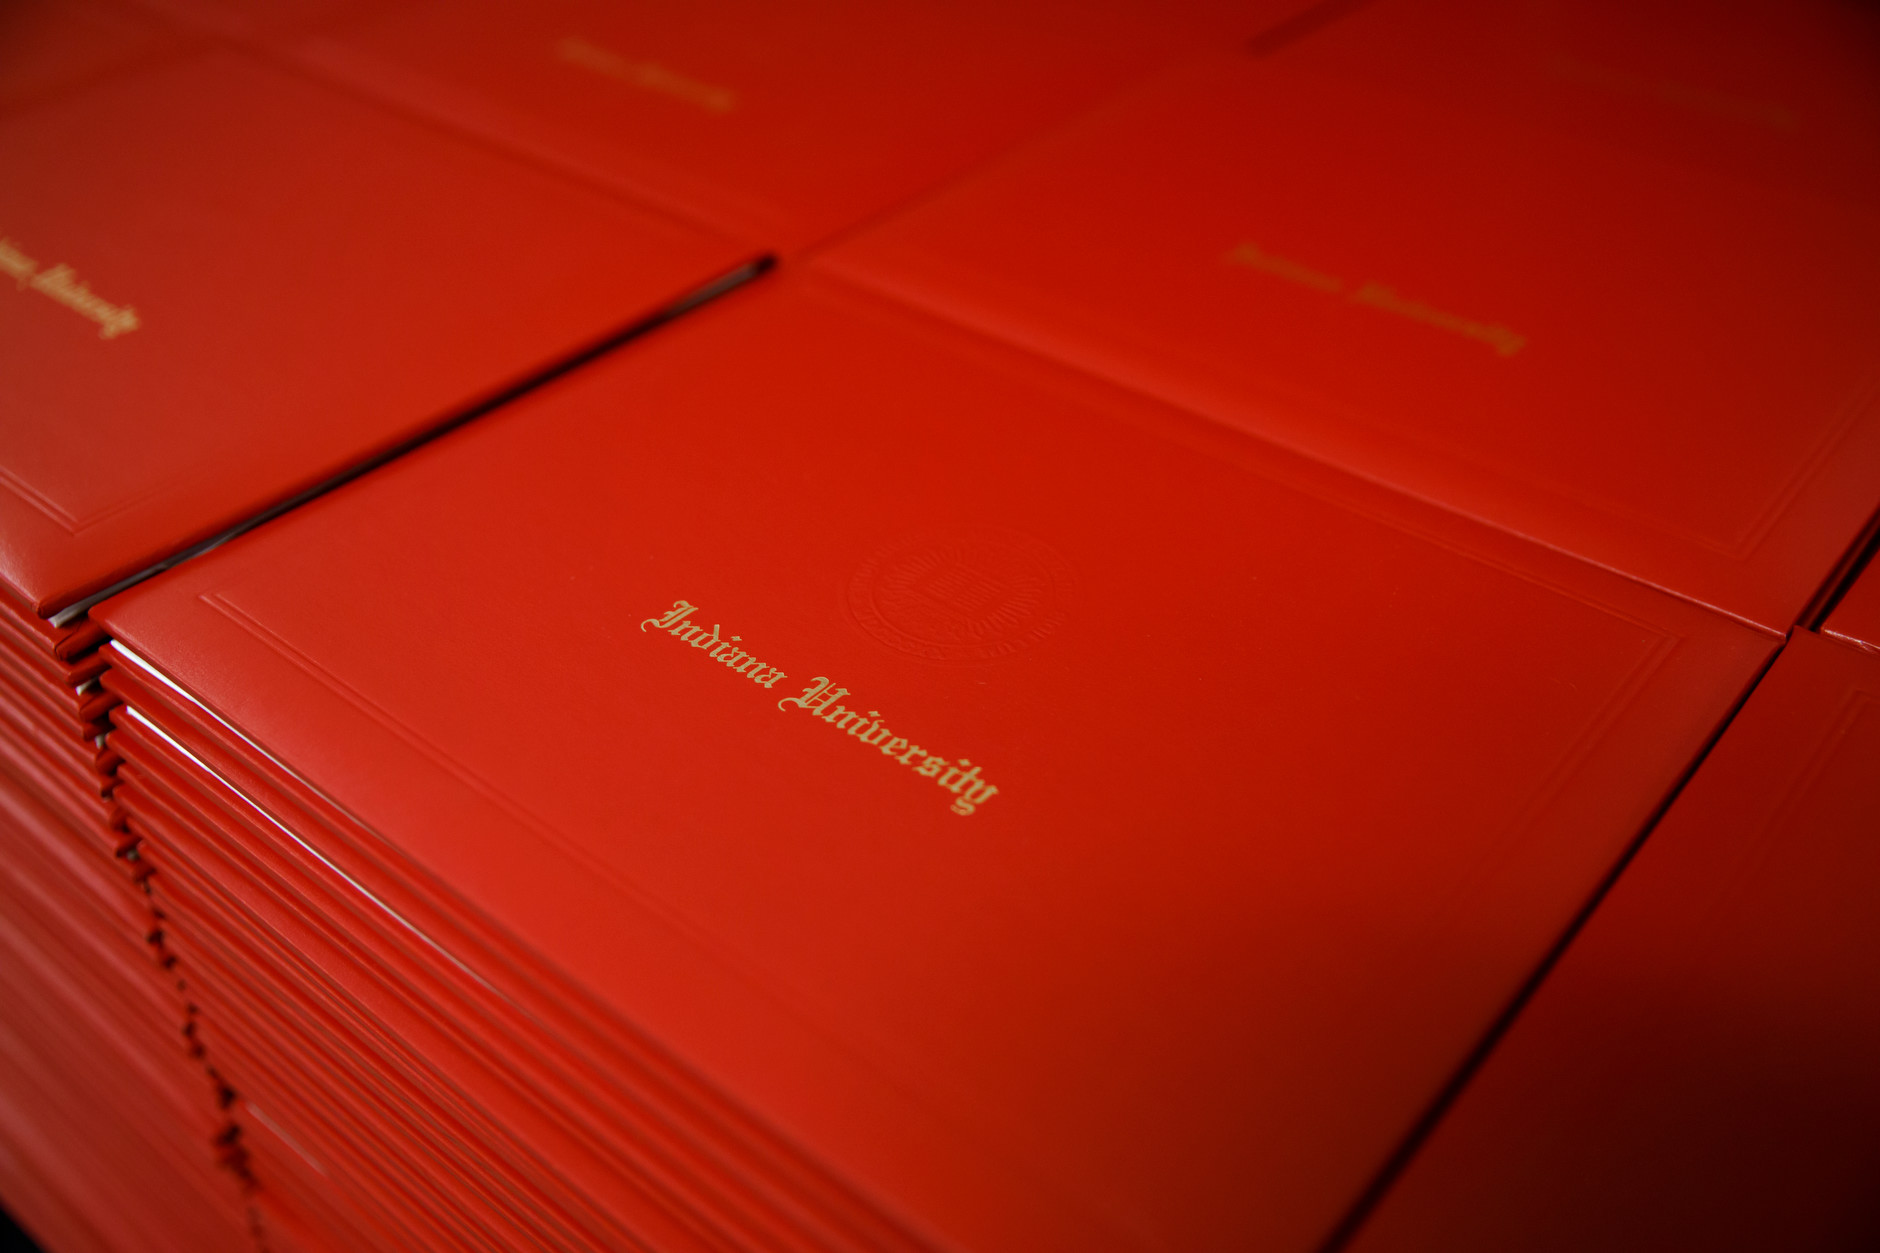 Indiana University diplomas sit in a stack before the start of the IU Bloomington Graduate Commencement at Assembly Hall on Friday, May 3, 2019. (James Brosher/Indiana University)